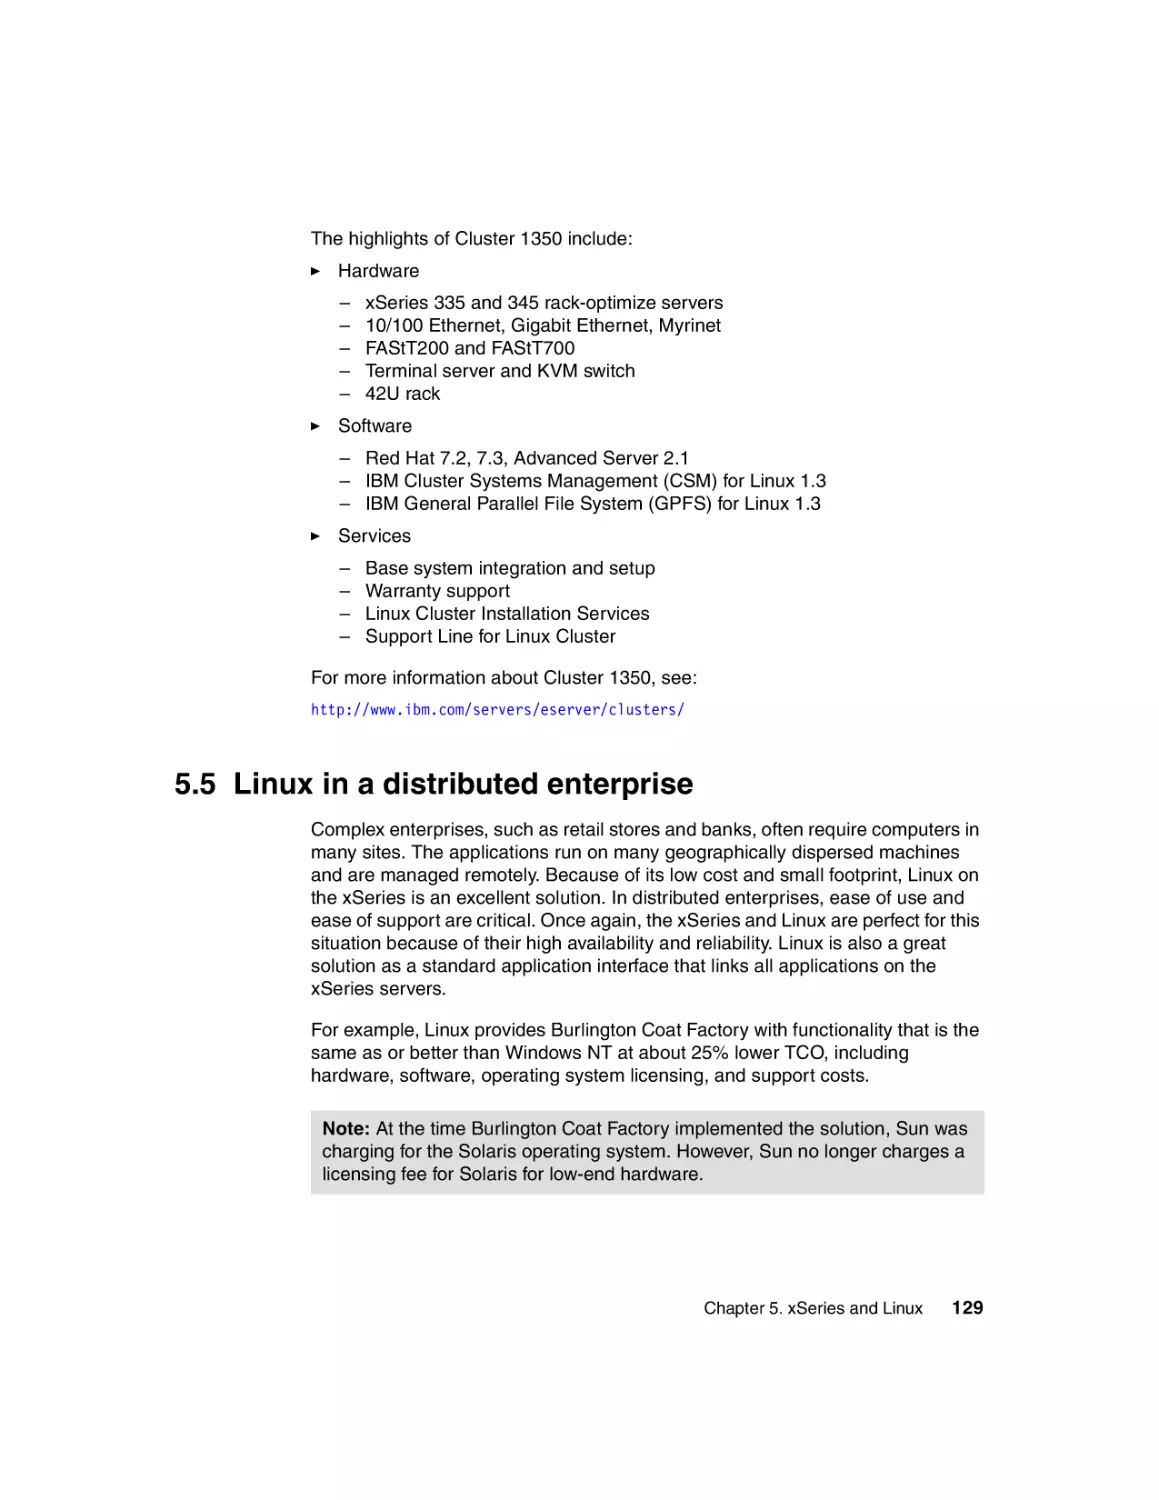 5.5 Linux in a distributed enterprise